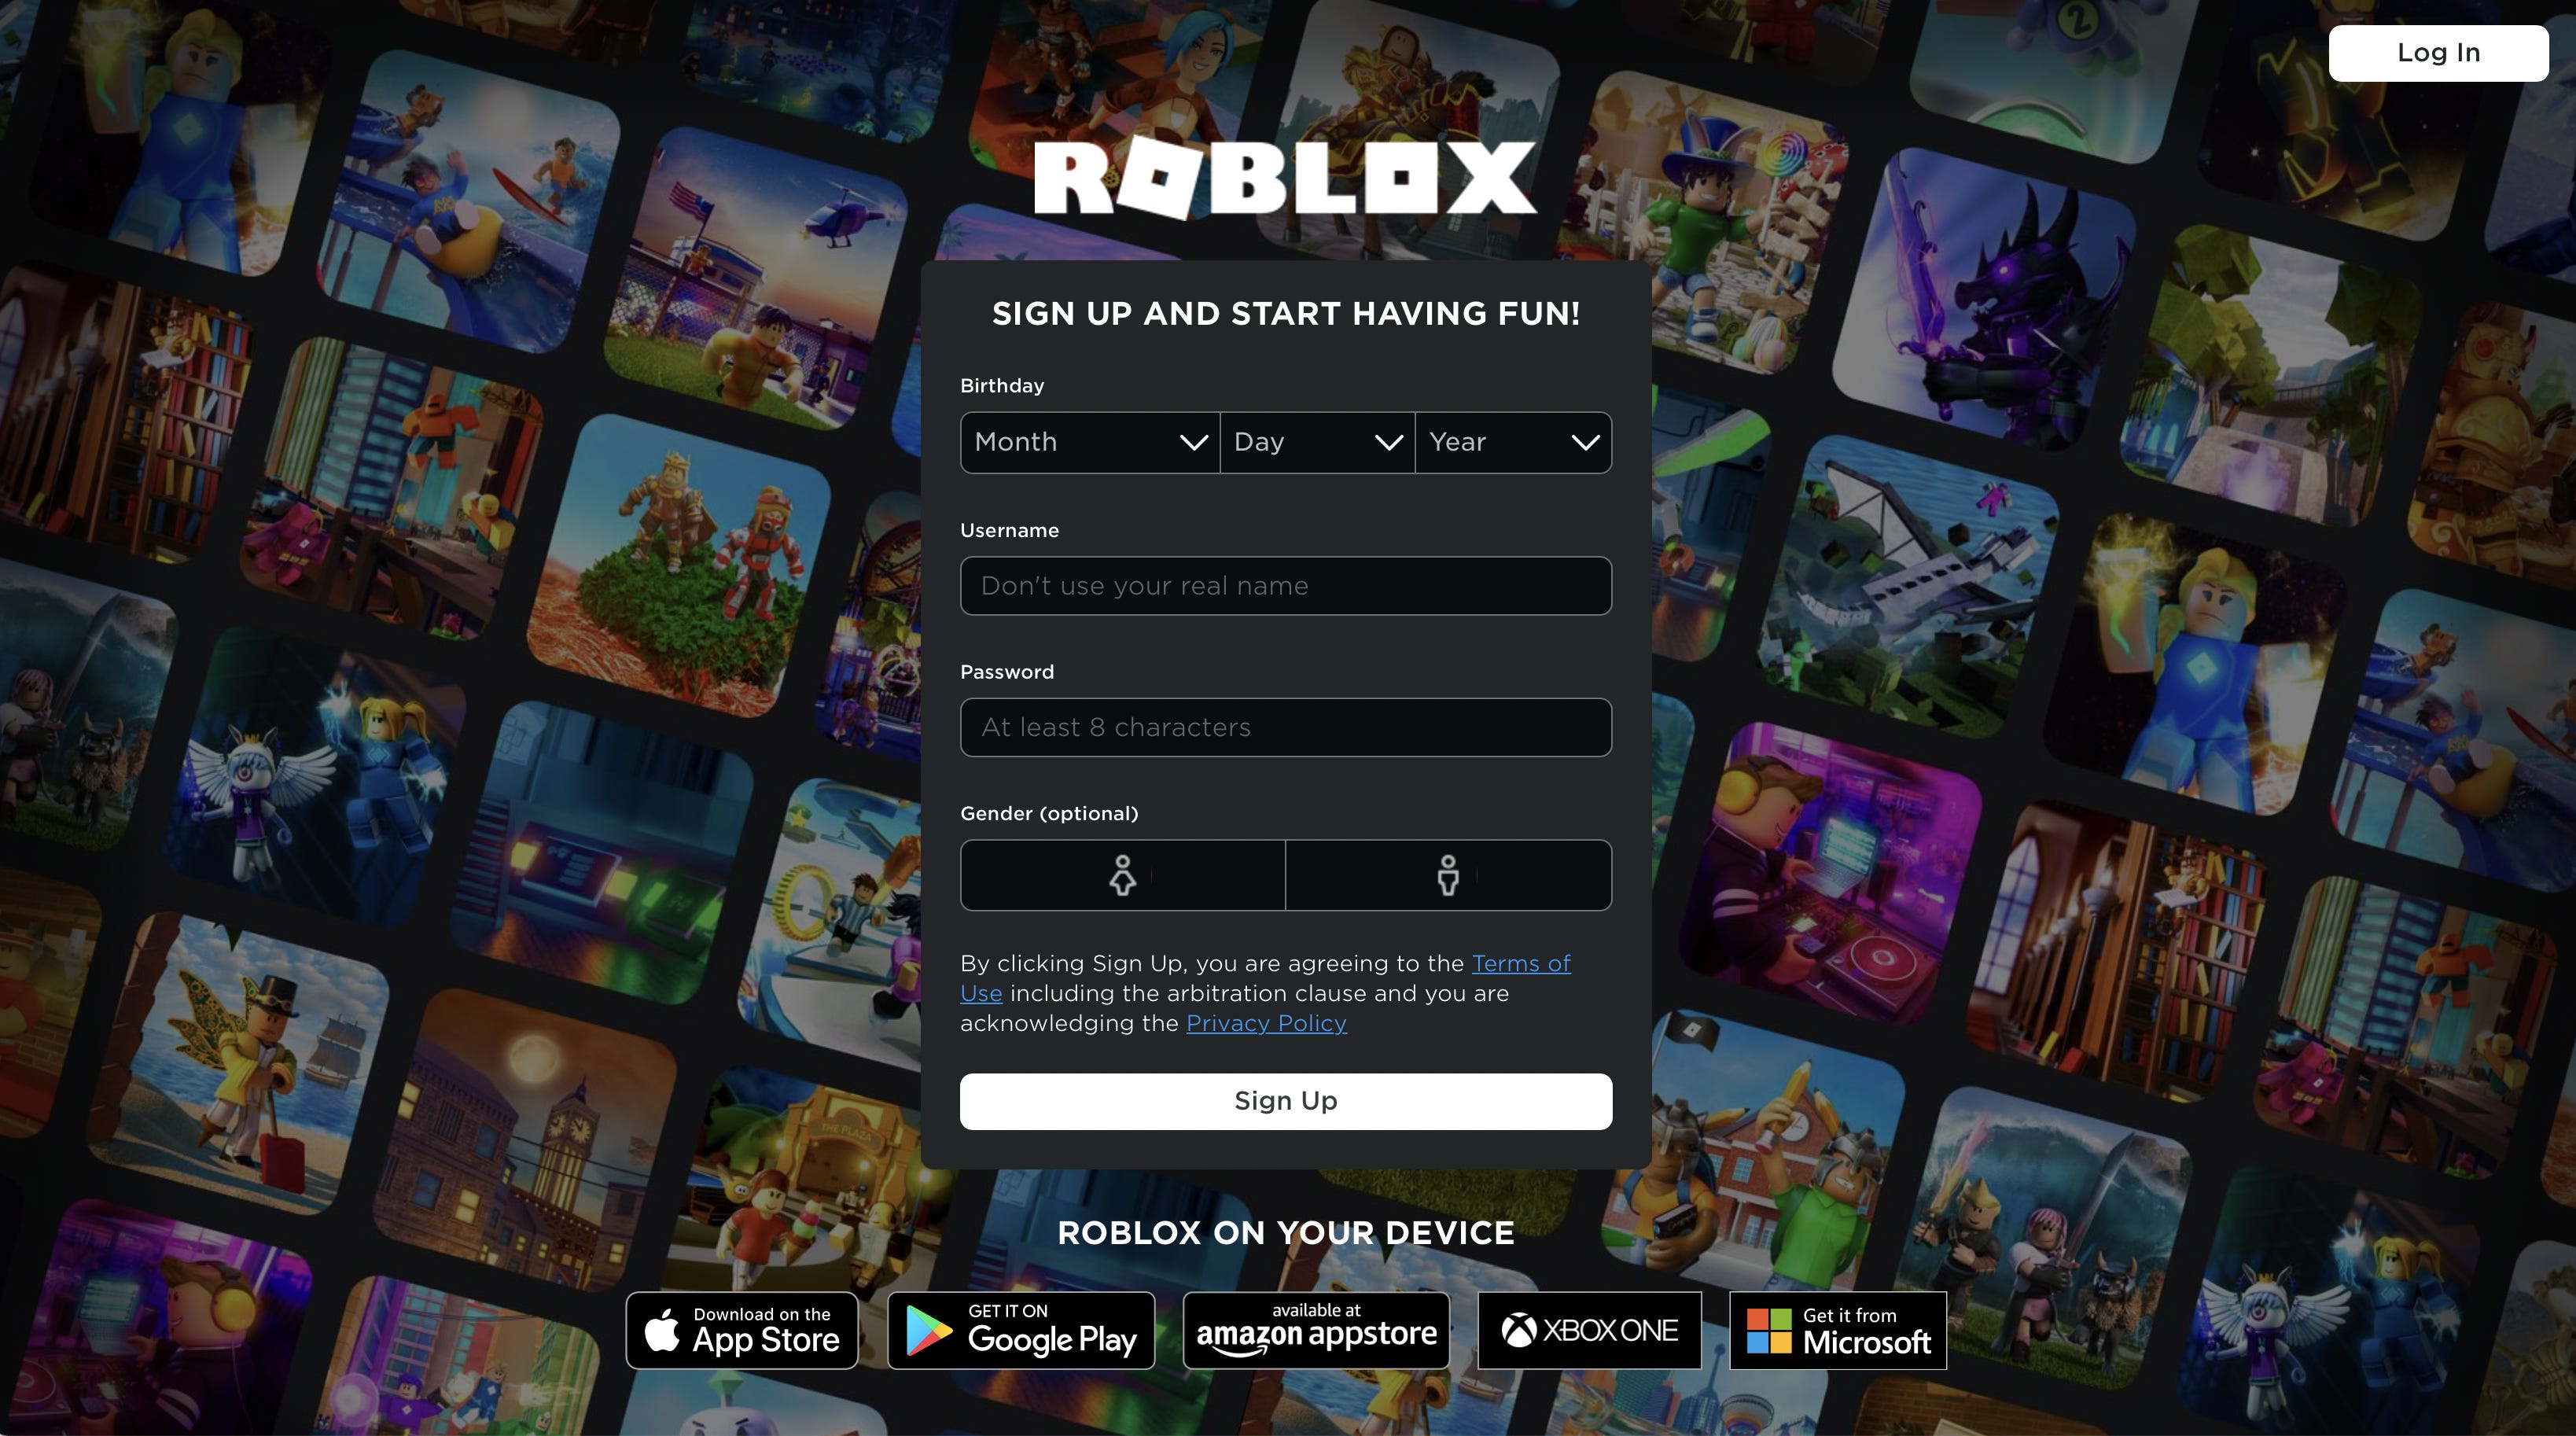 Roblox S Growth Strategies And Why Becoming A Metaverse Is A Bad Idea By Benjamin Schroeder No Ordinary Strategy - give robux today